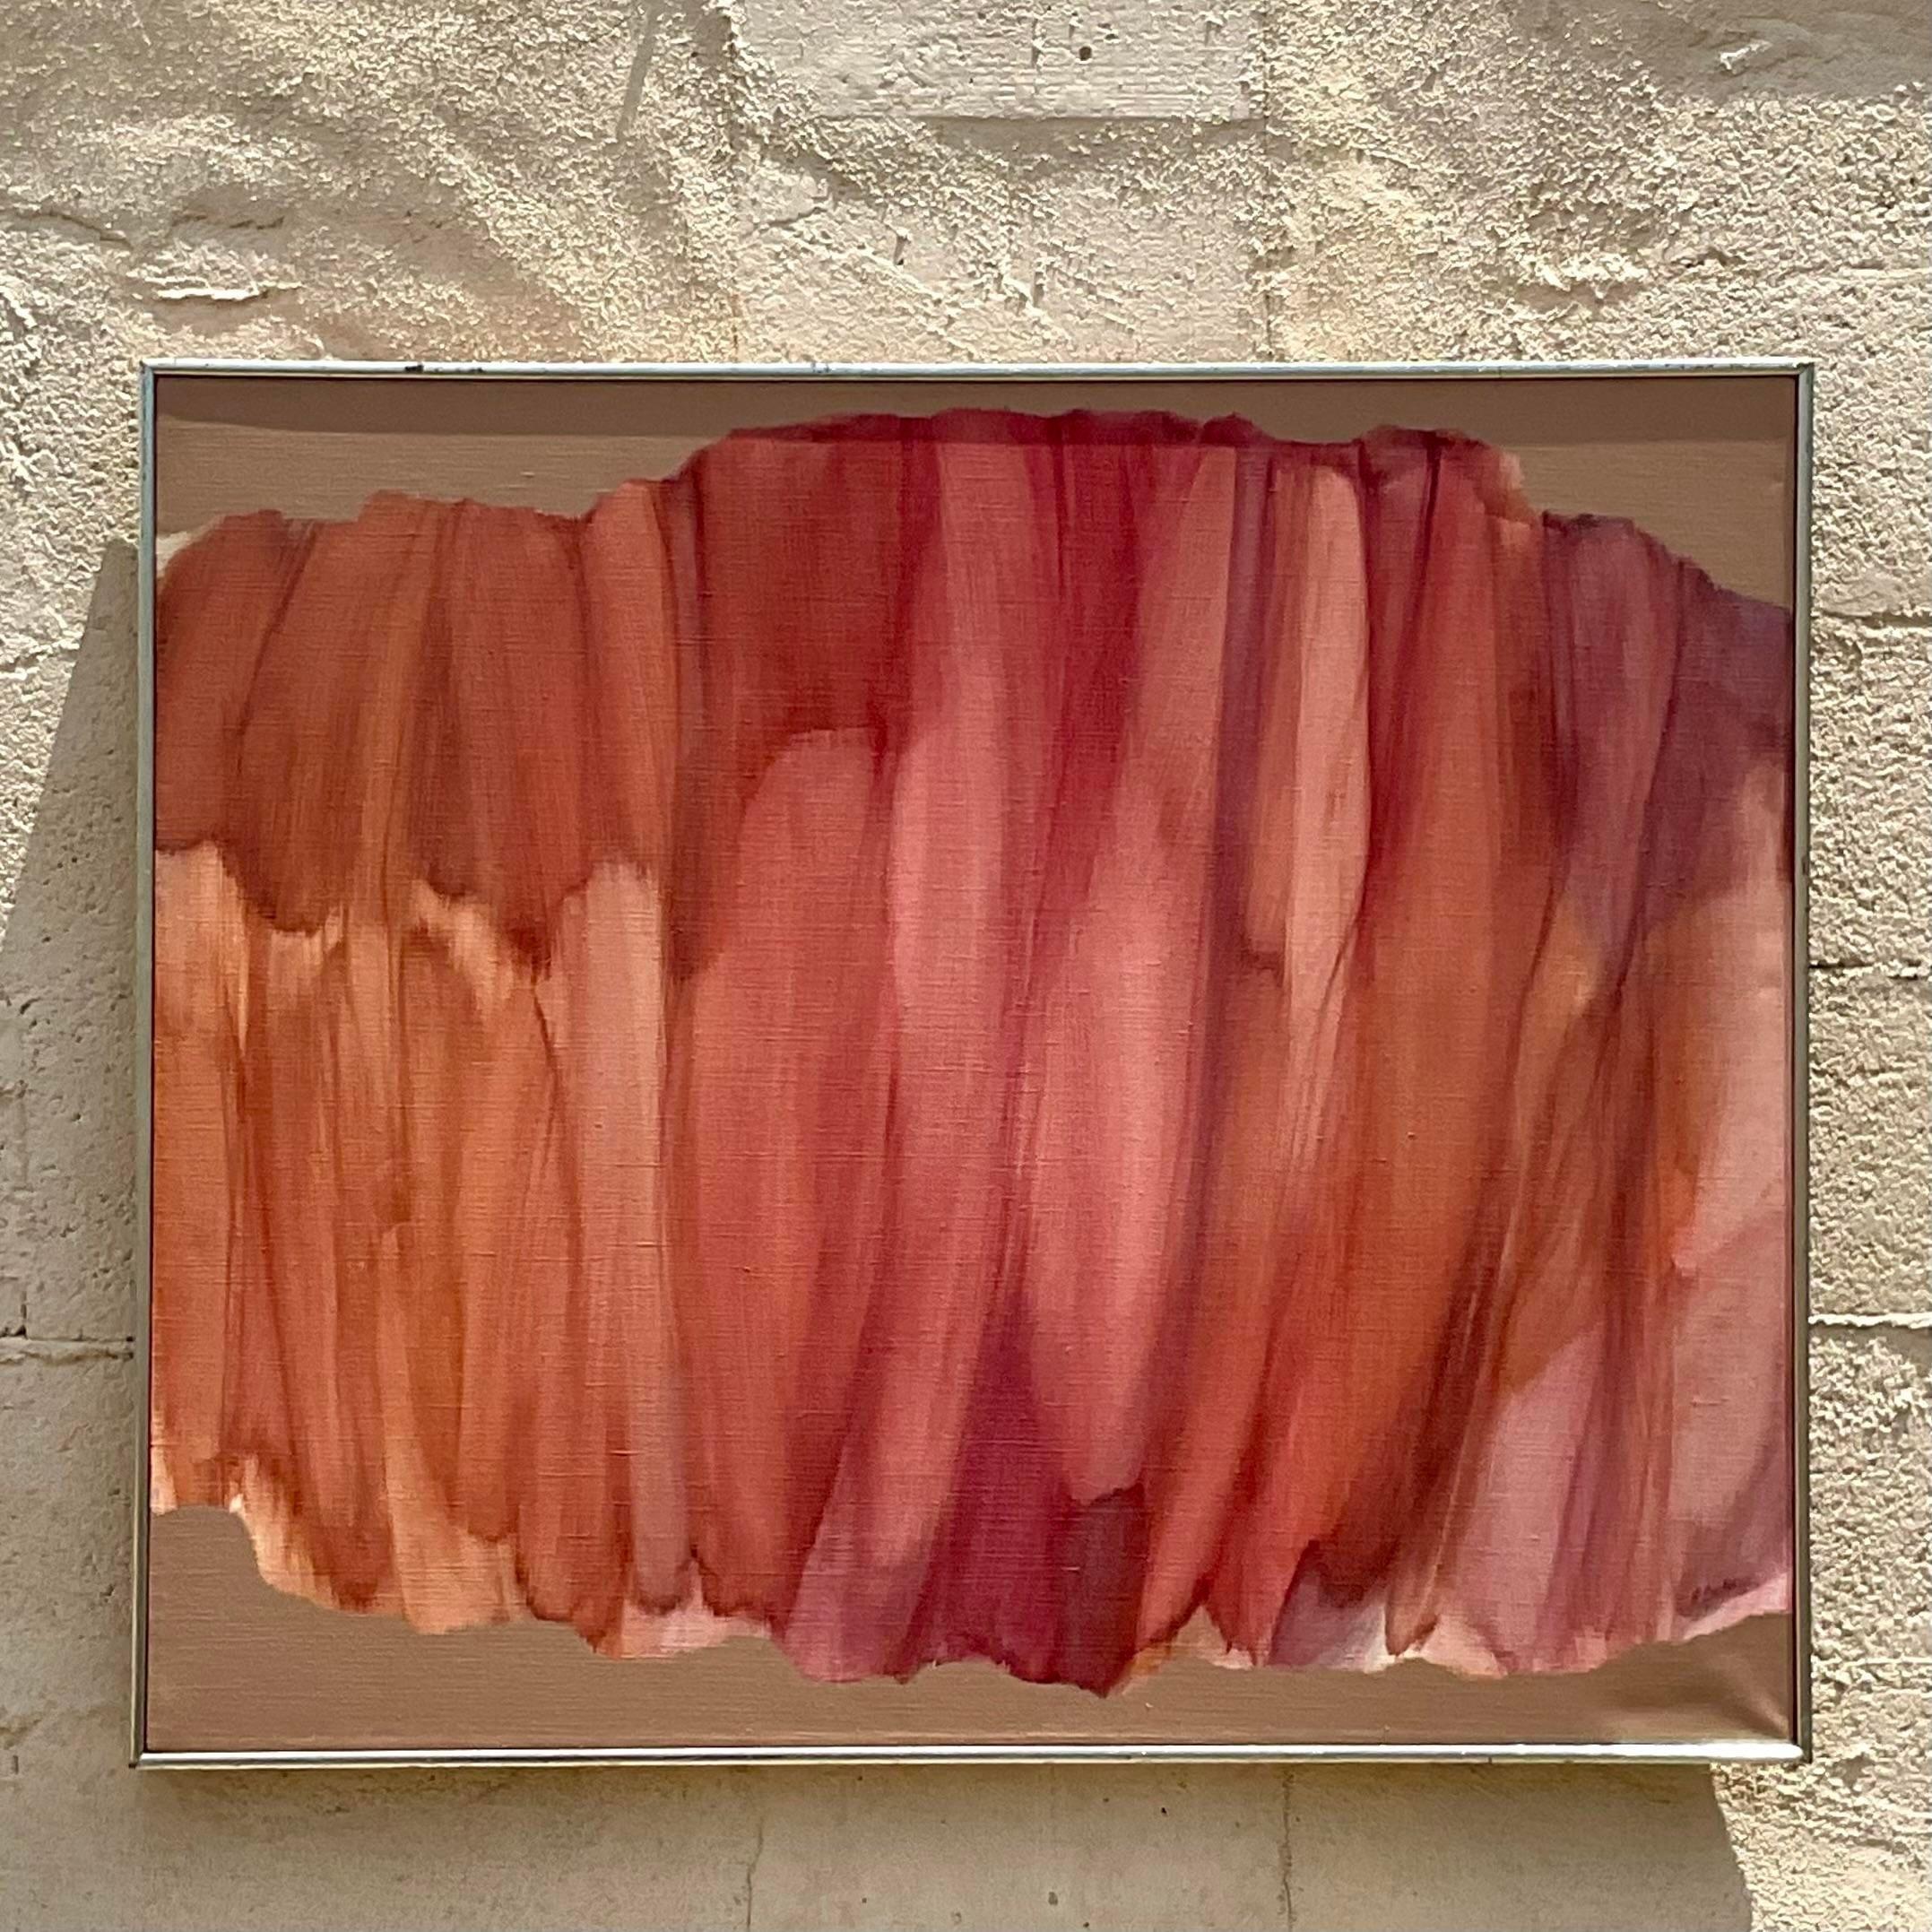 An incredible vintage Boho original oil on canvas. A chic abstract composition in brilliant shades of orange. Signed and dated by the artist. Acquired from a Palm Beach estate